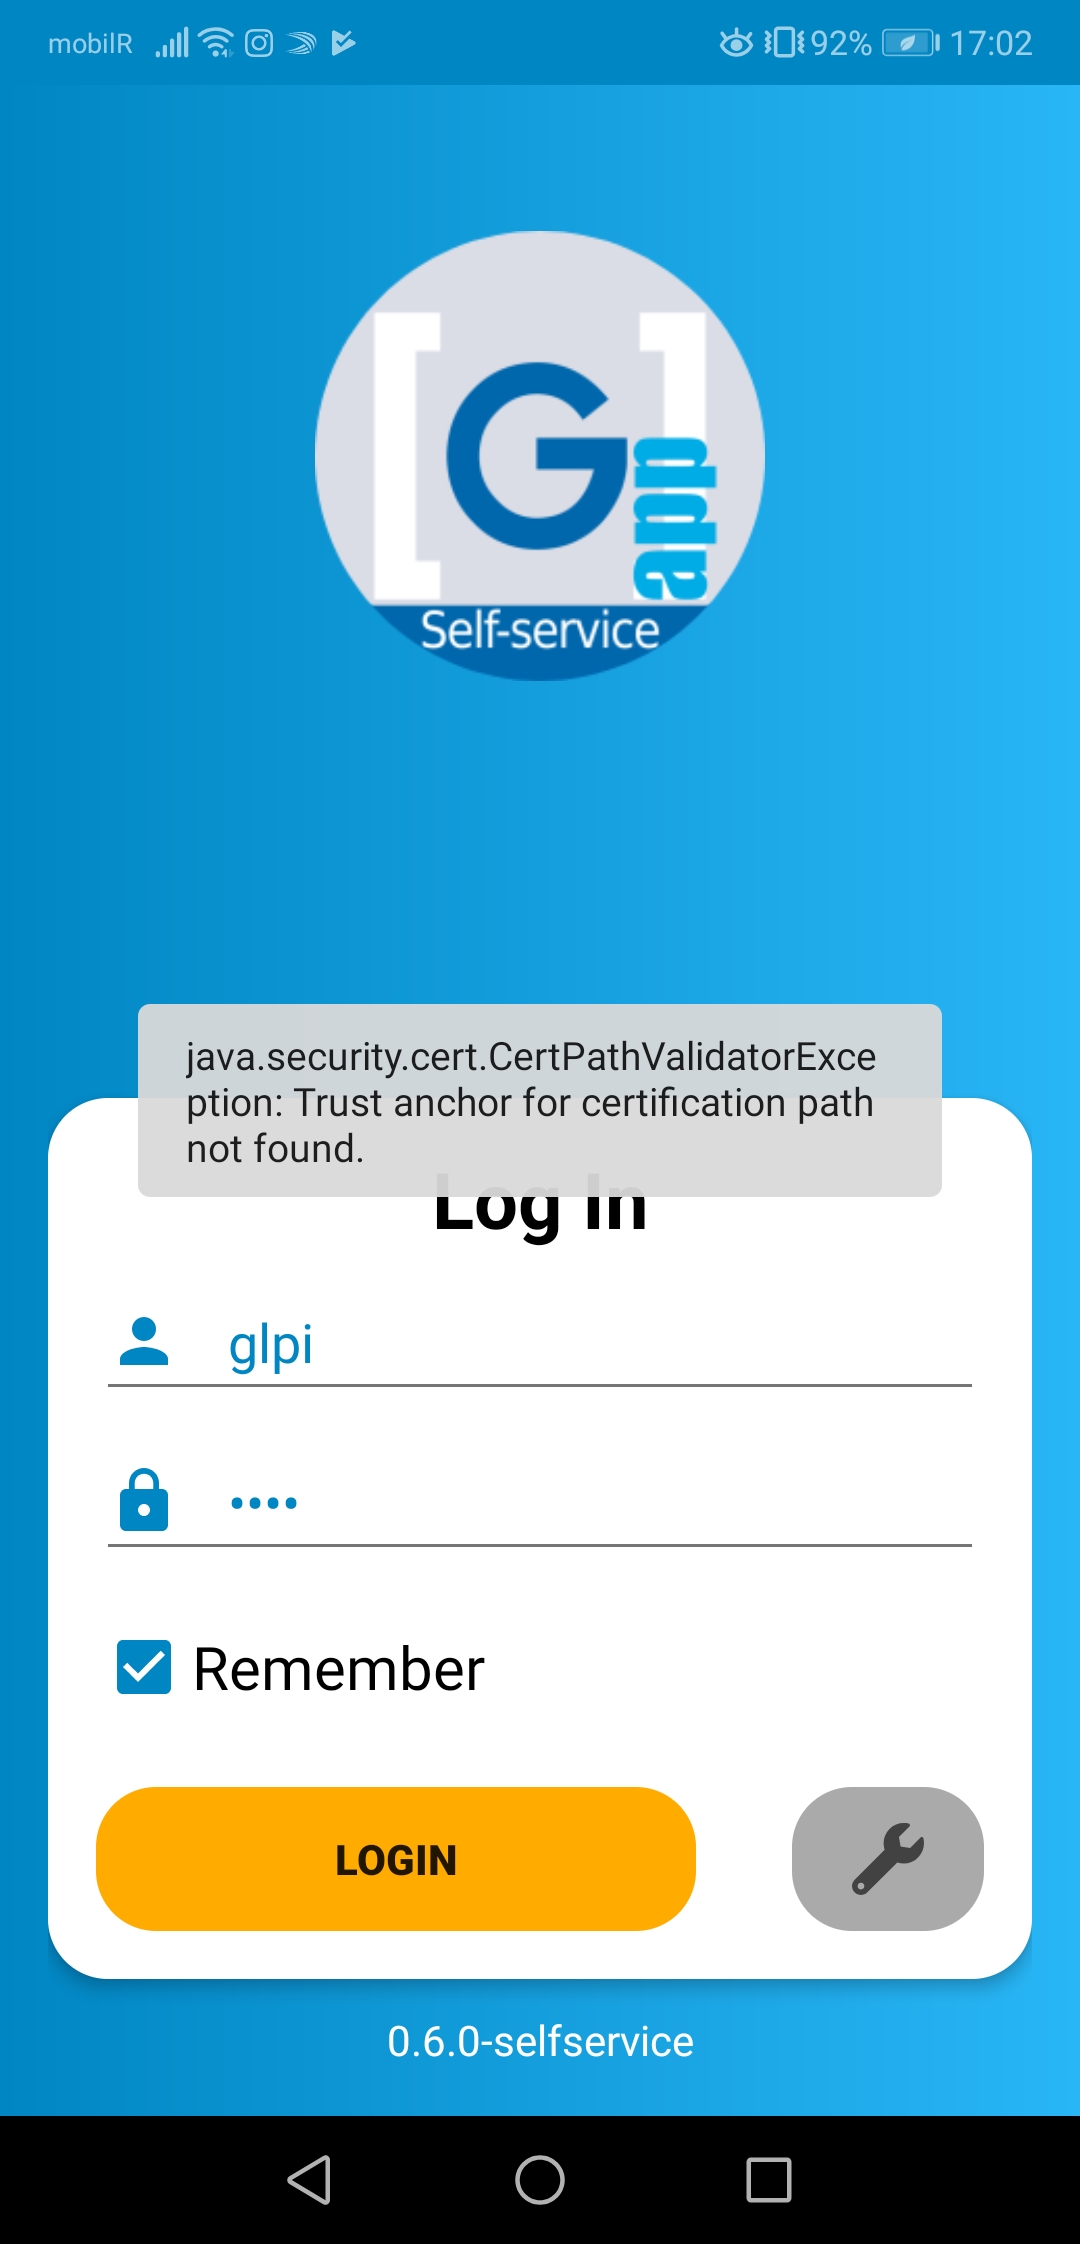 java.security.cert.CertPathValidatorException: Trust anchor for certification path not found on GLPI